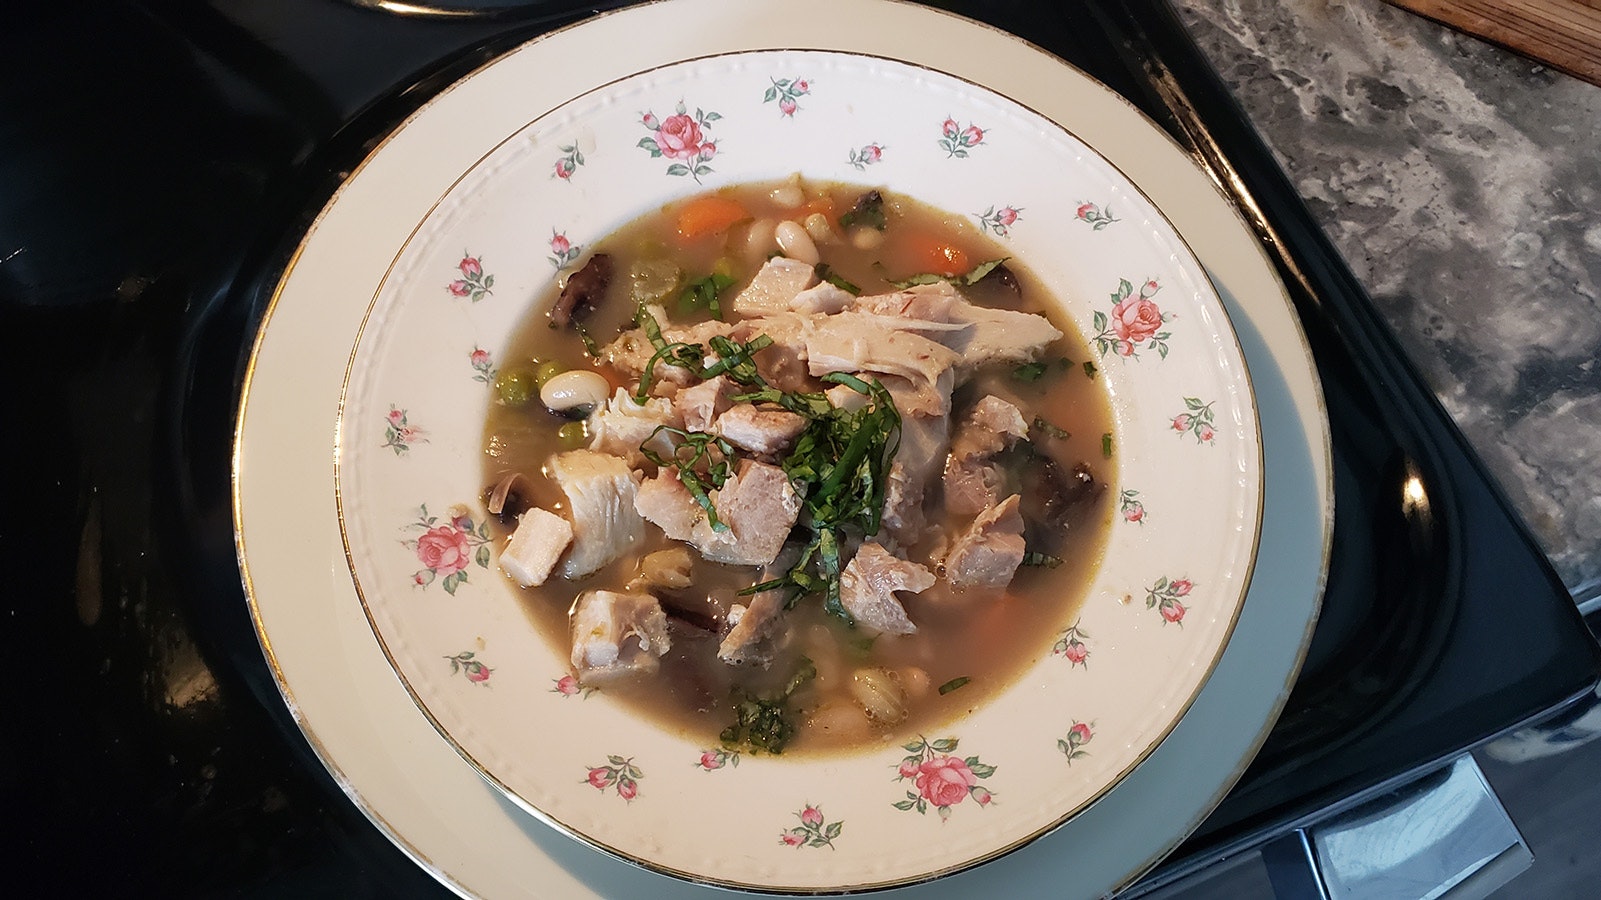 Top soup made from an Eat Wyoming veggie box with some leftover holiday turkey for a hearty, healthy meal.